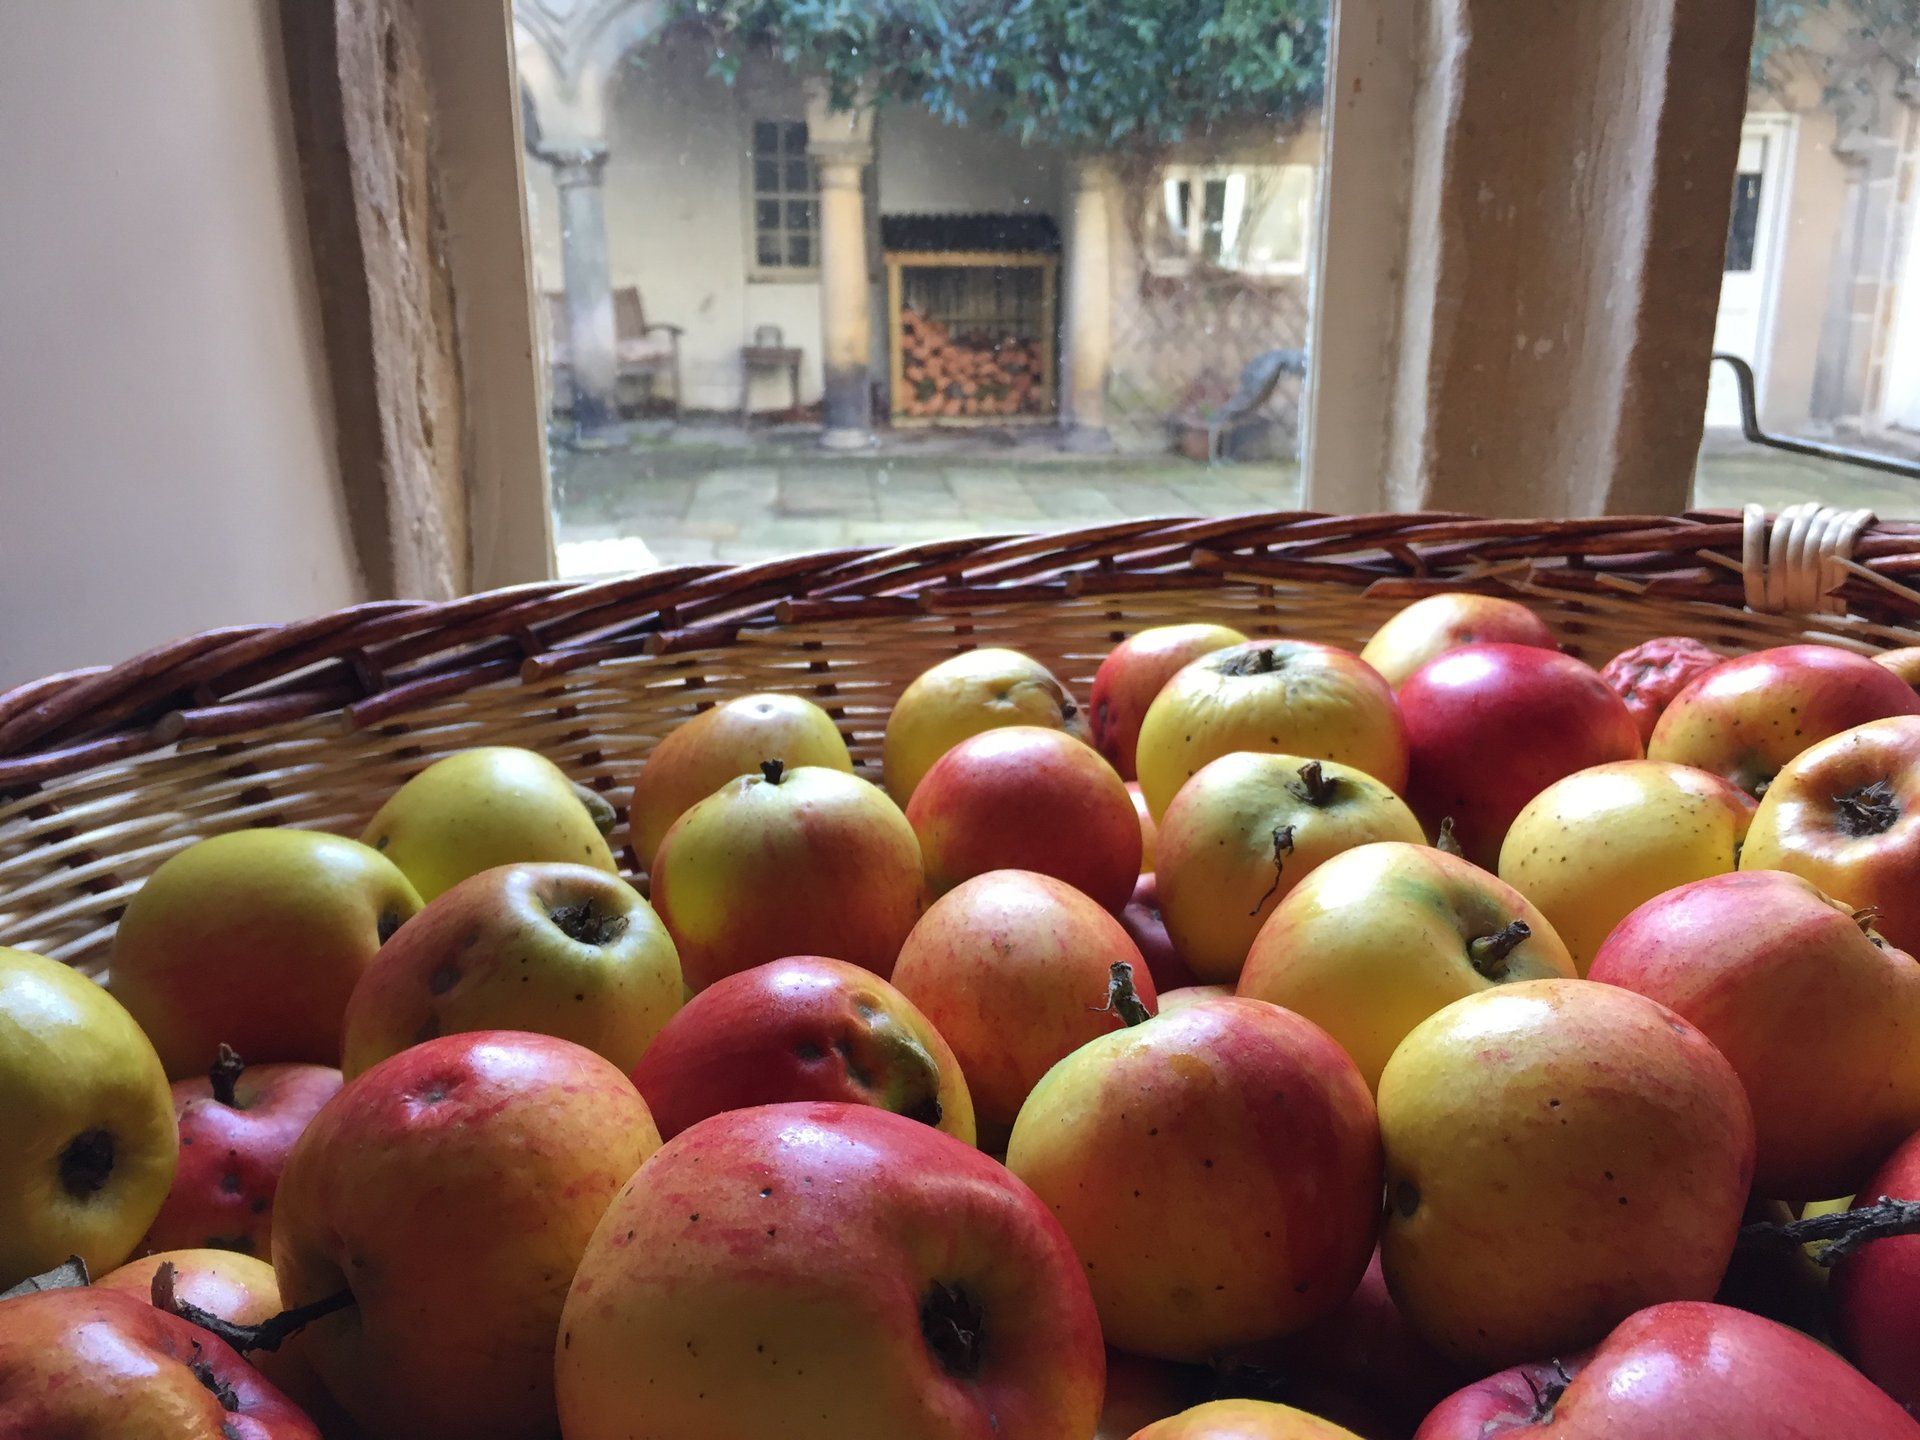 Apples from the walled garden orchard at Ingleby Manor